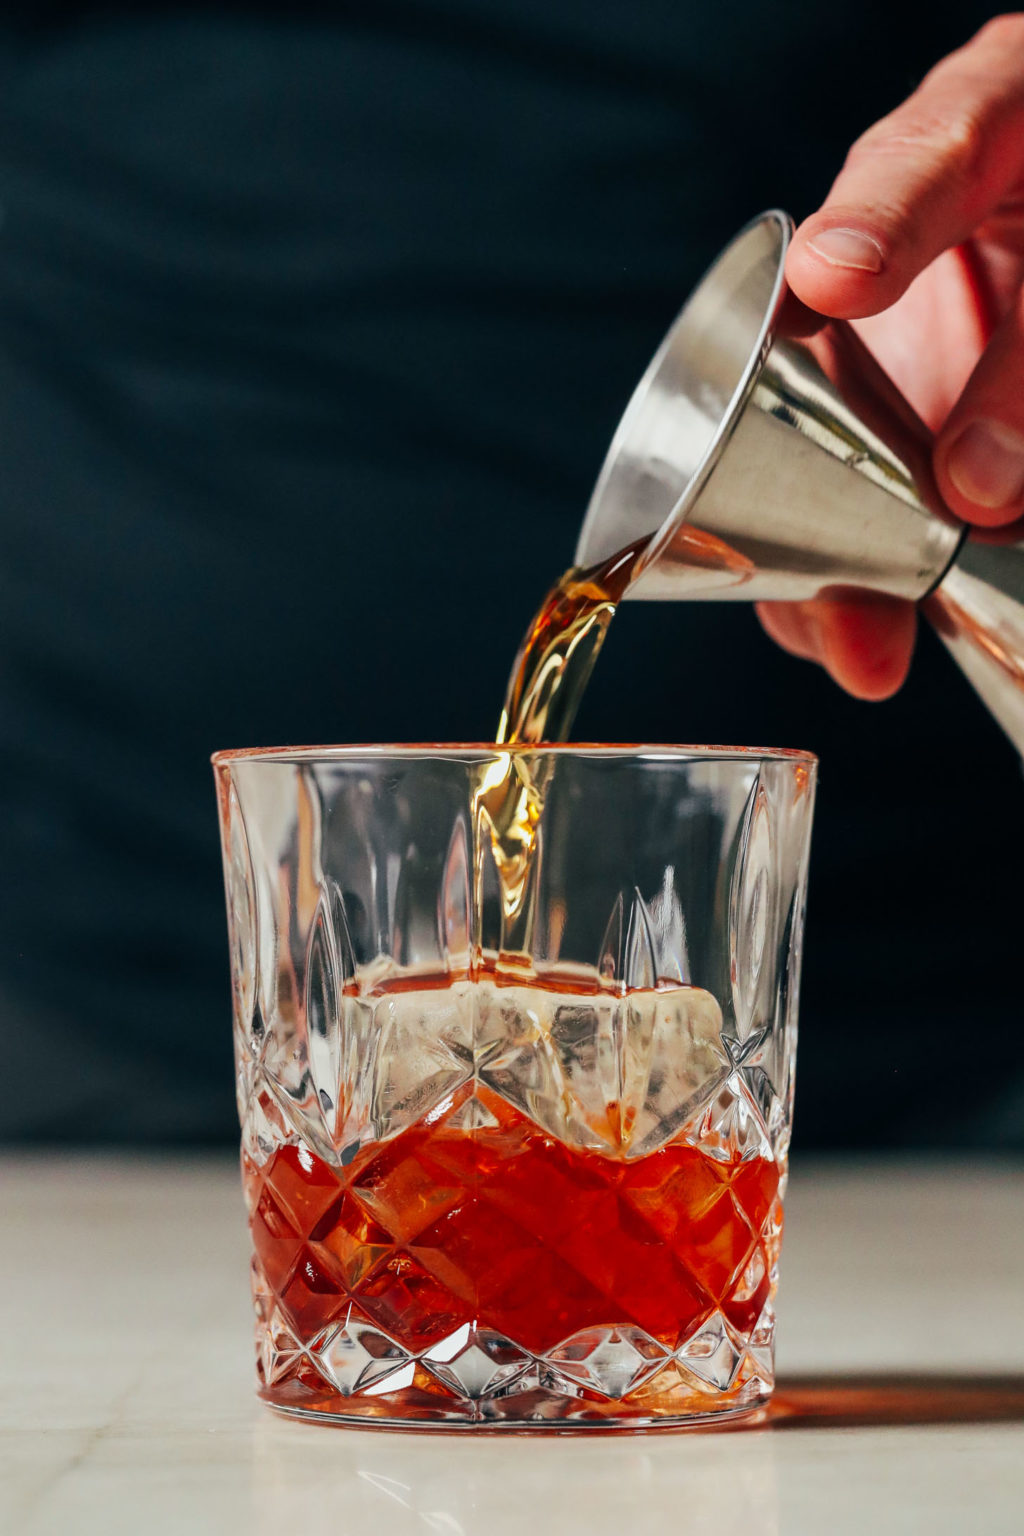 THE BEST Old Fashioned Recipe Thoroughly Tested Quick And Easy To Make PERFECT For Happy Hour. Recipes Oldfashioned Cocktail Minimalistbaker 21 1024x1536 